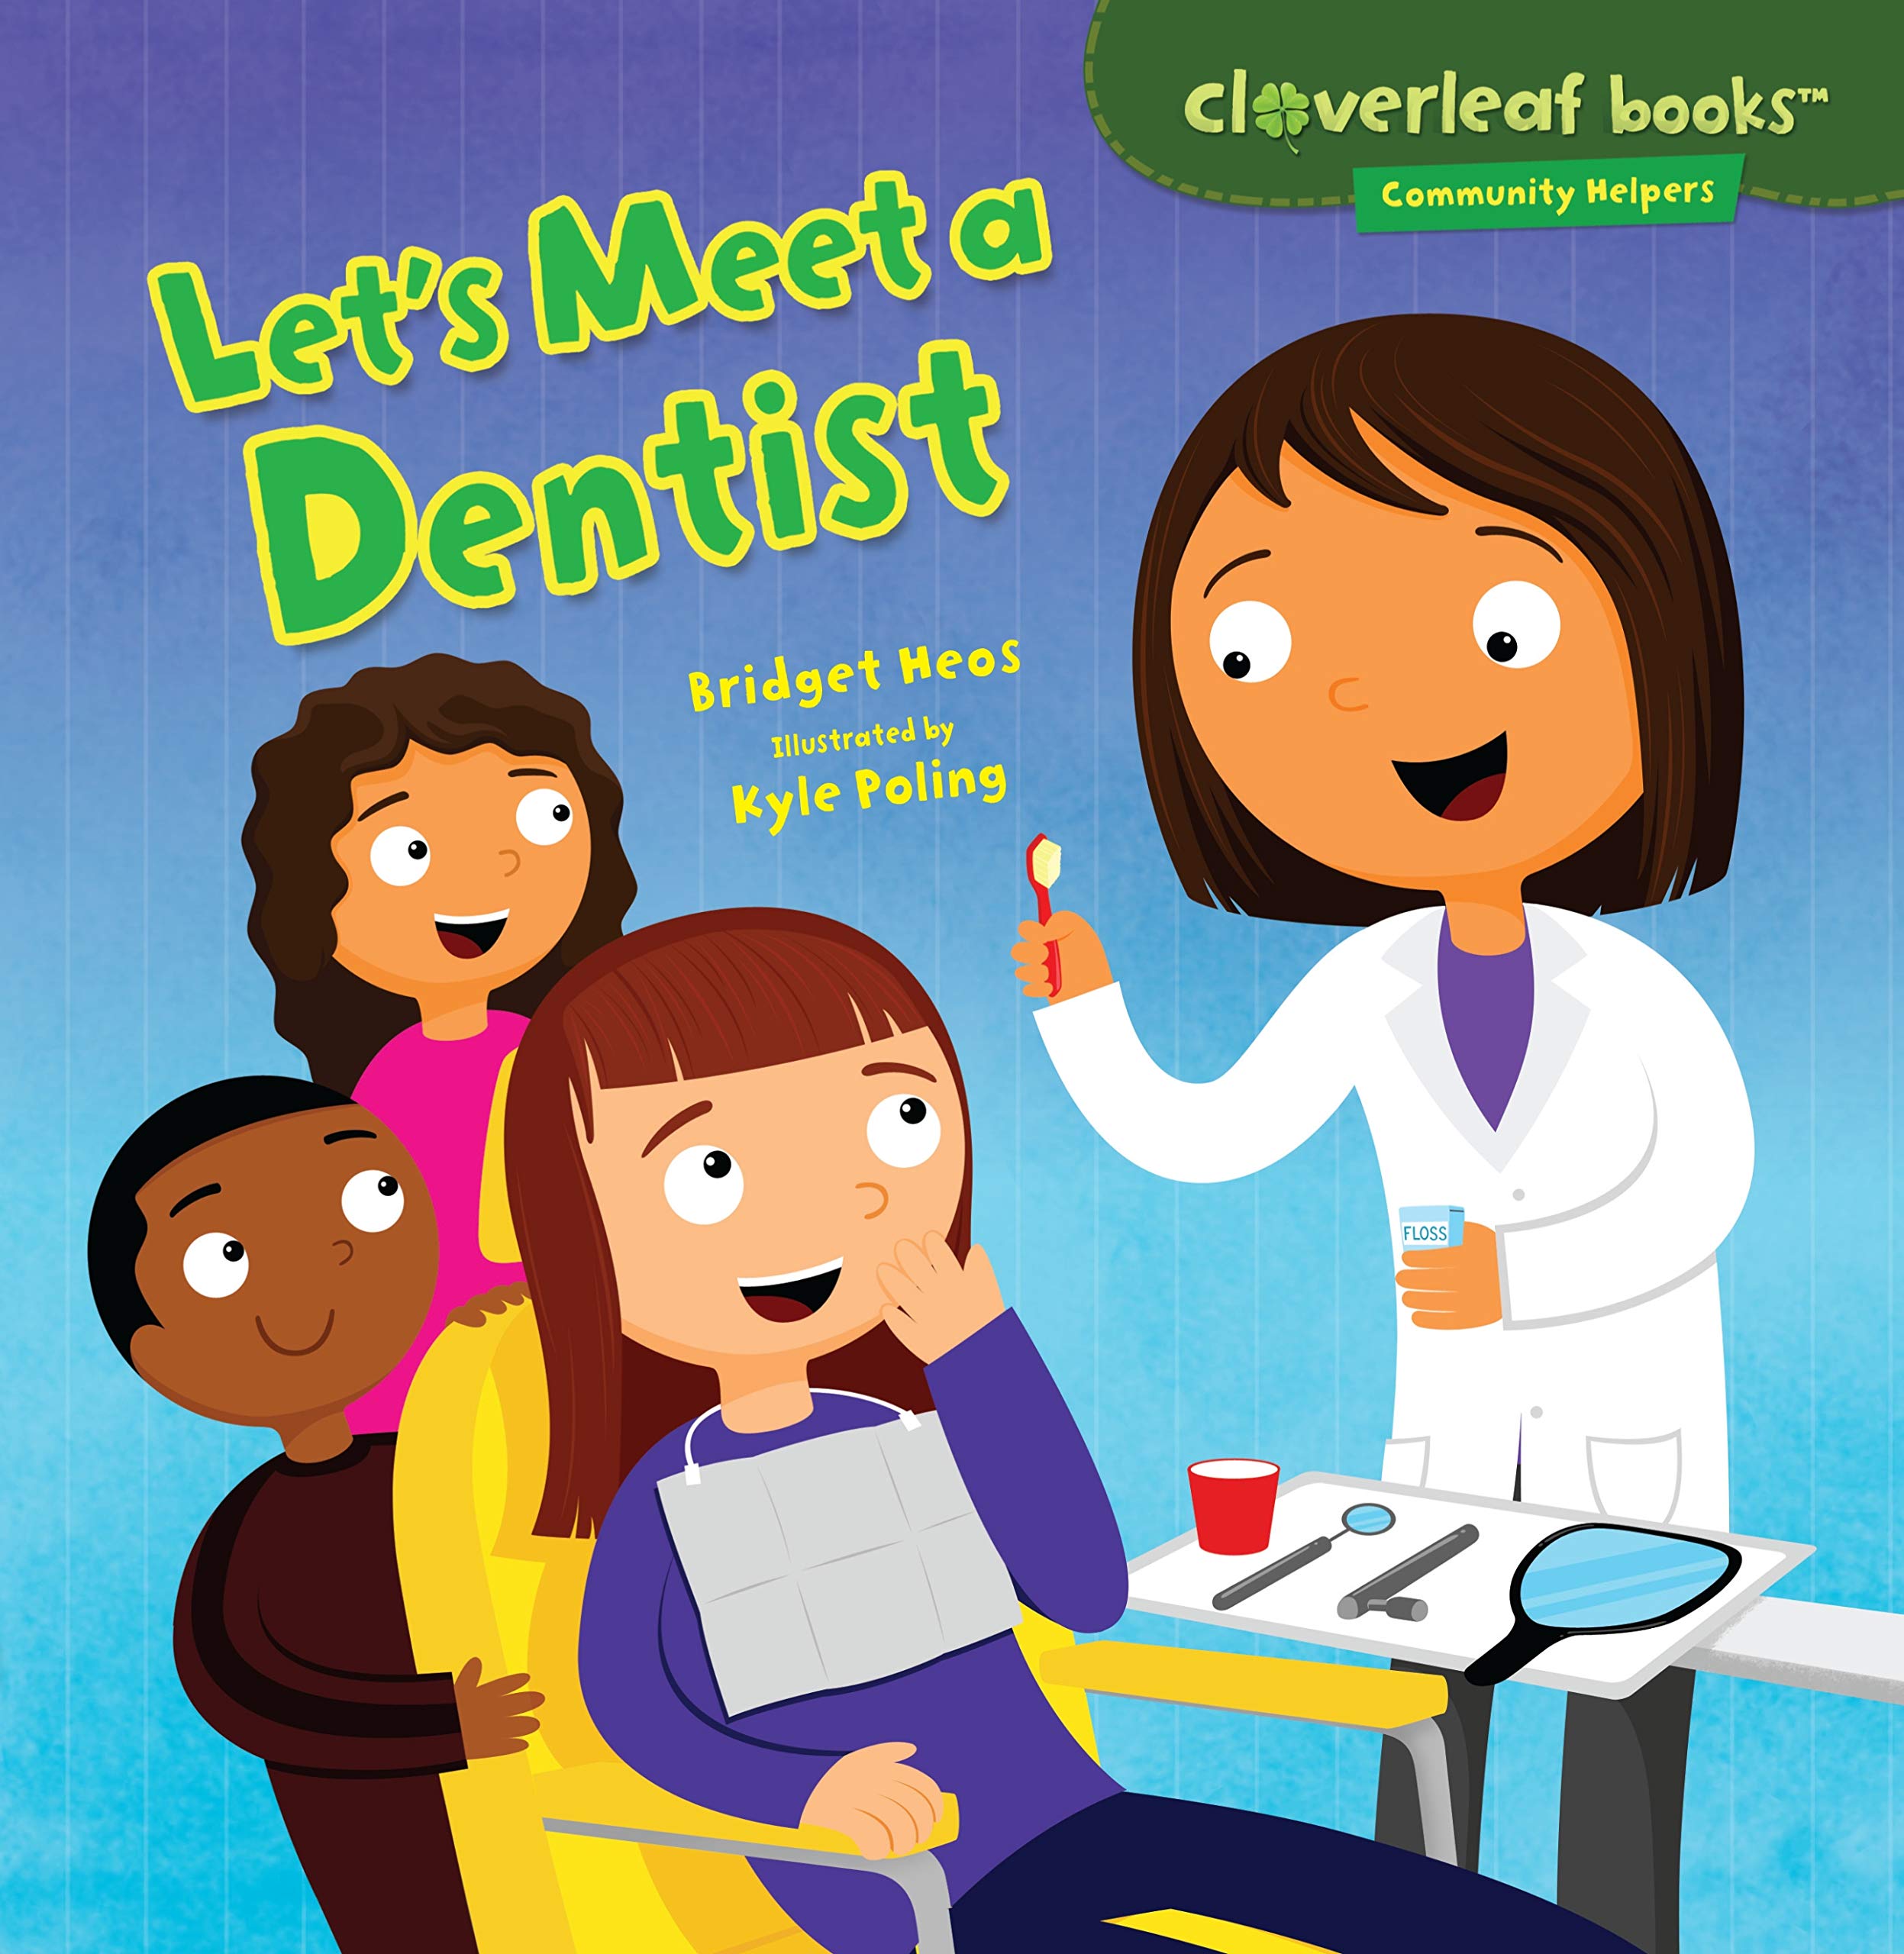 speech and language teaching concepts for lets meet a dentist in speech therapy